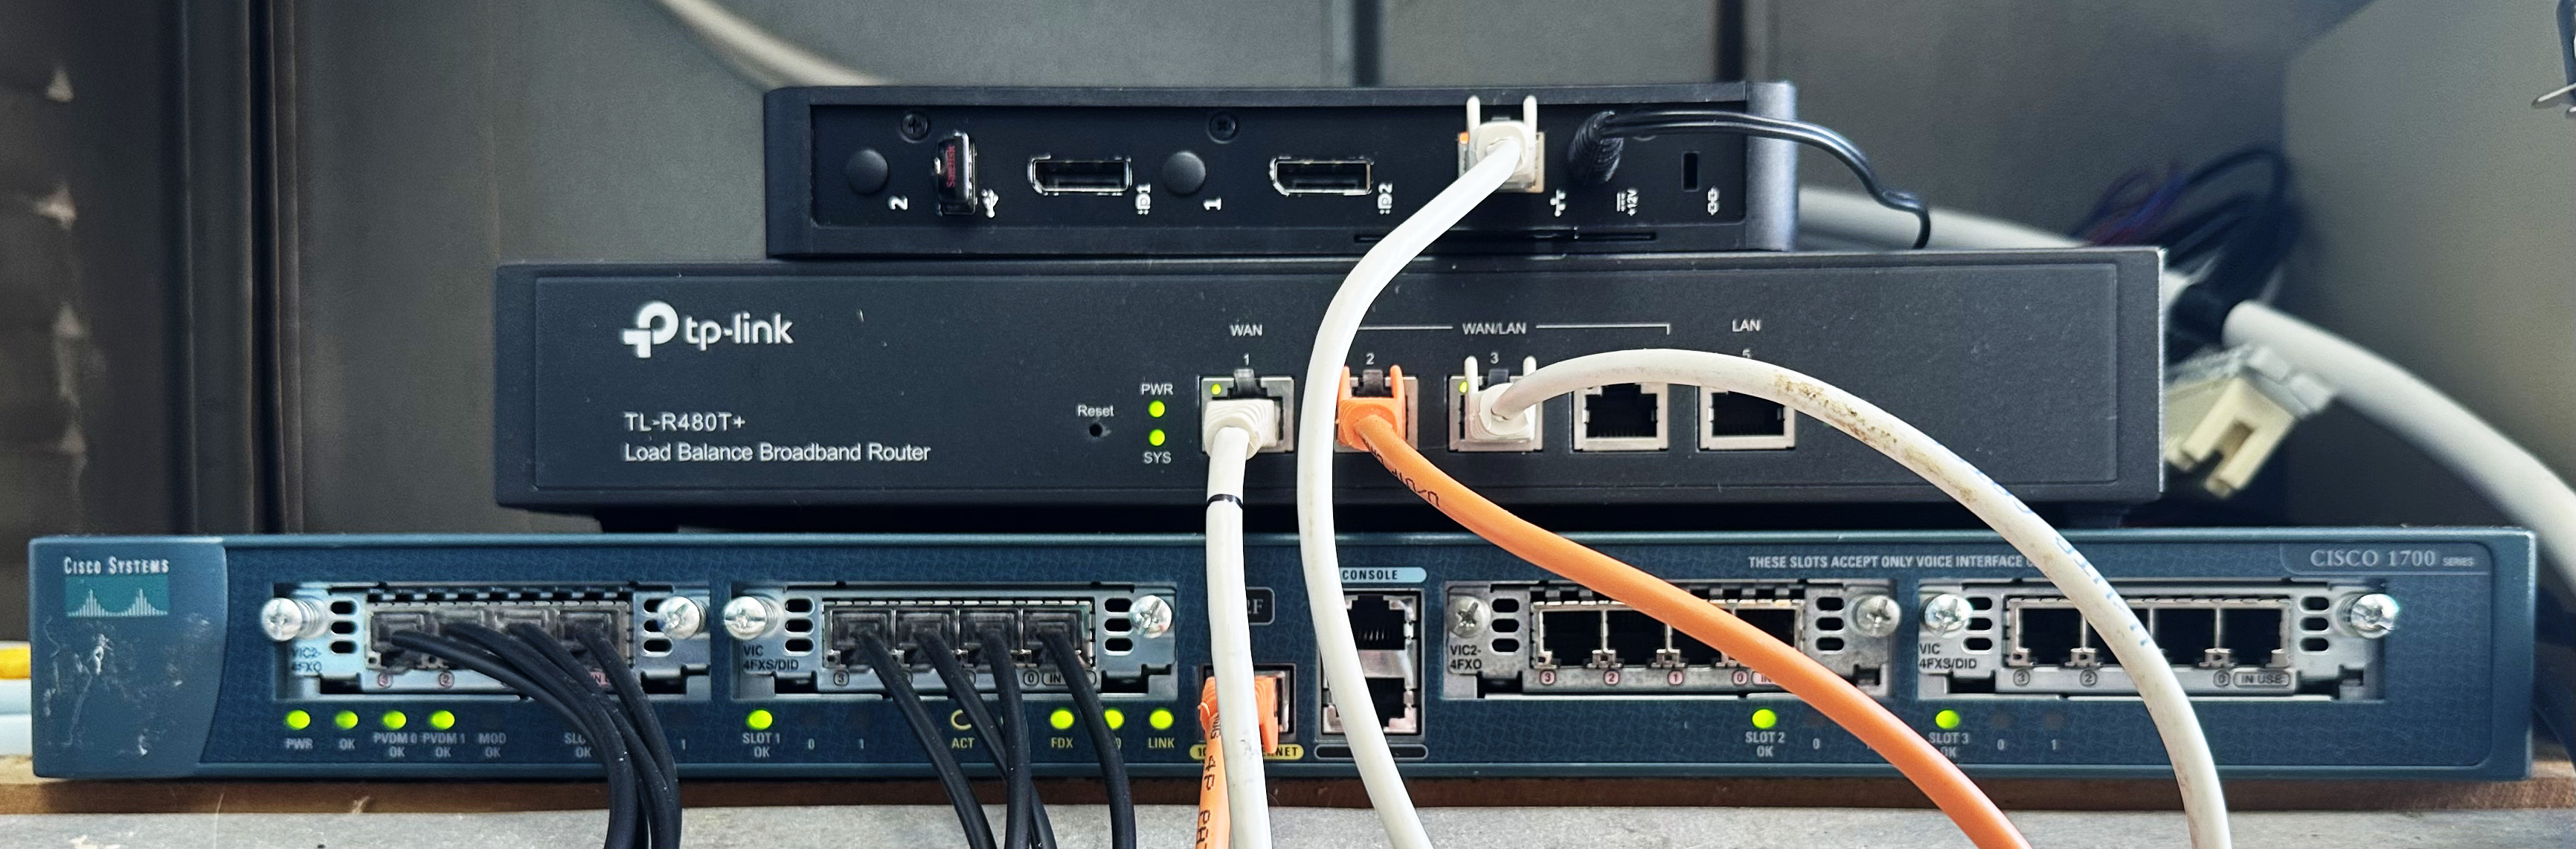 photo of a small stack of networking equipment, with a cisco 1760, a TP-Link TL-R480T and a Dell thin client